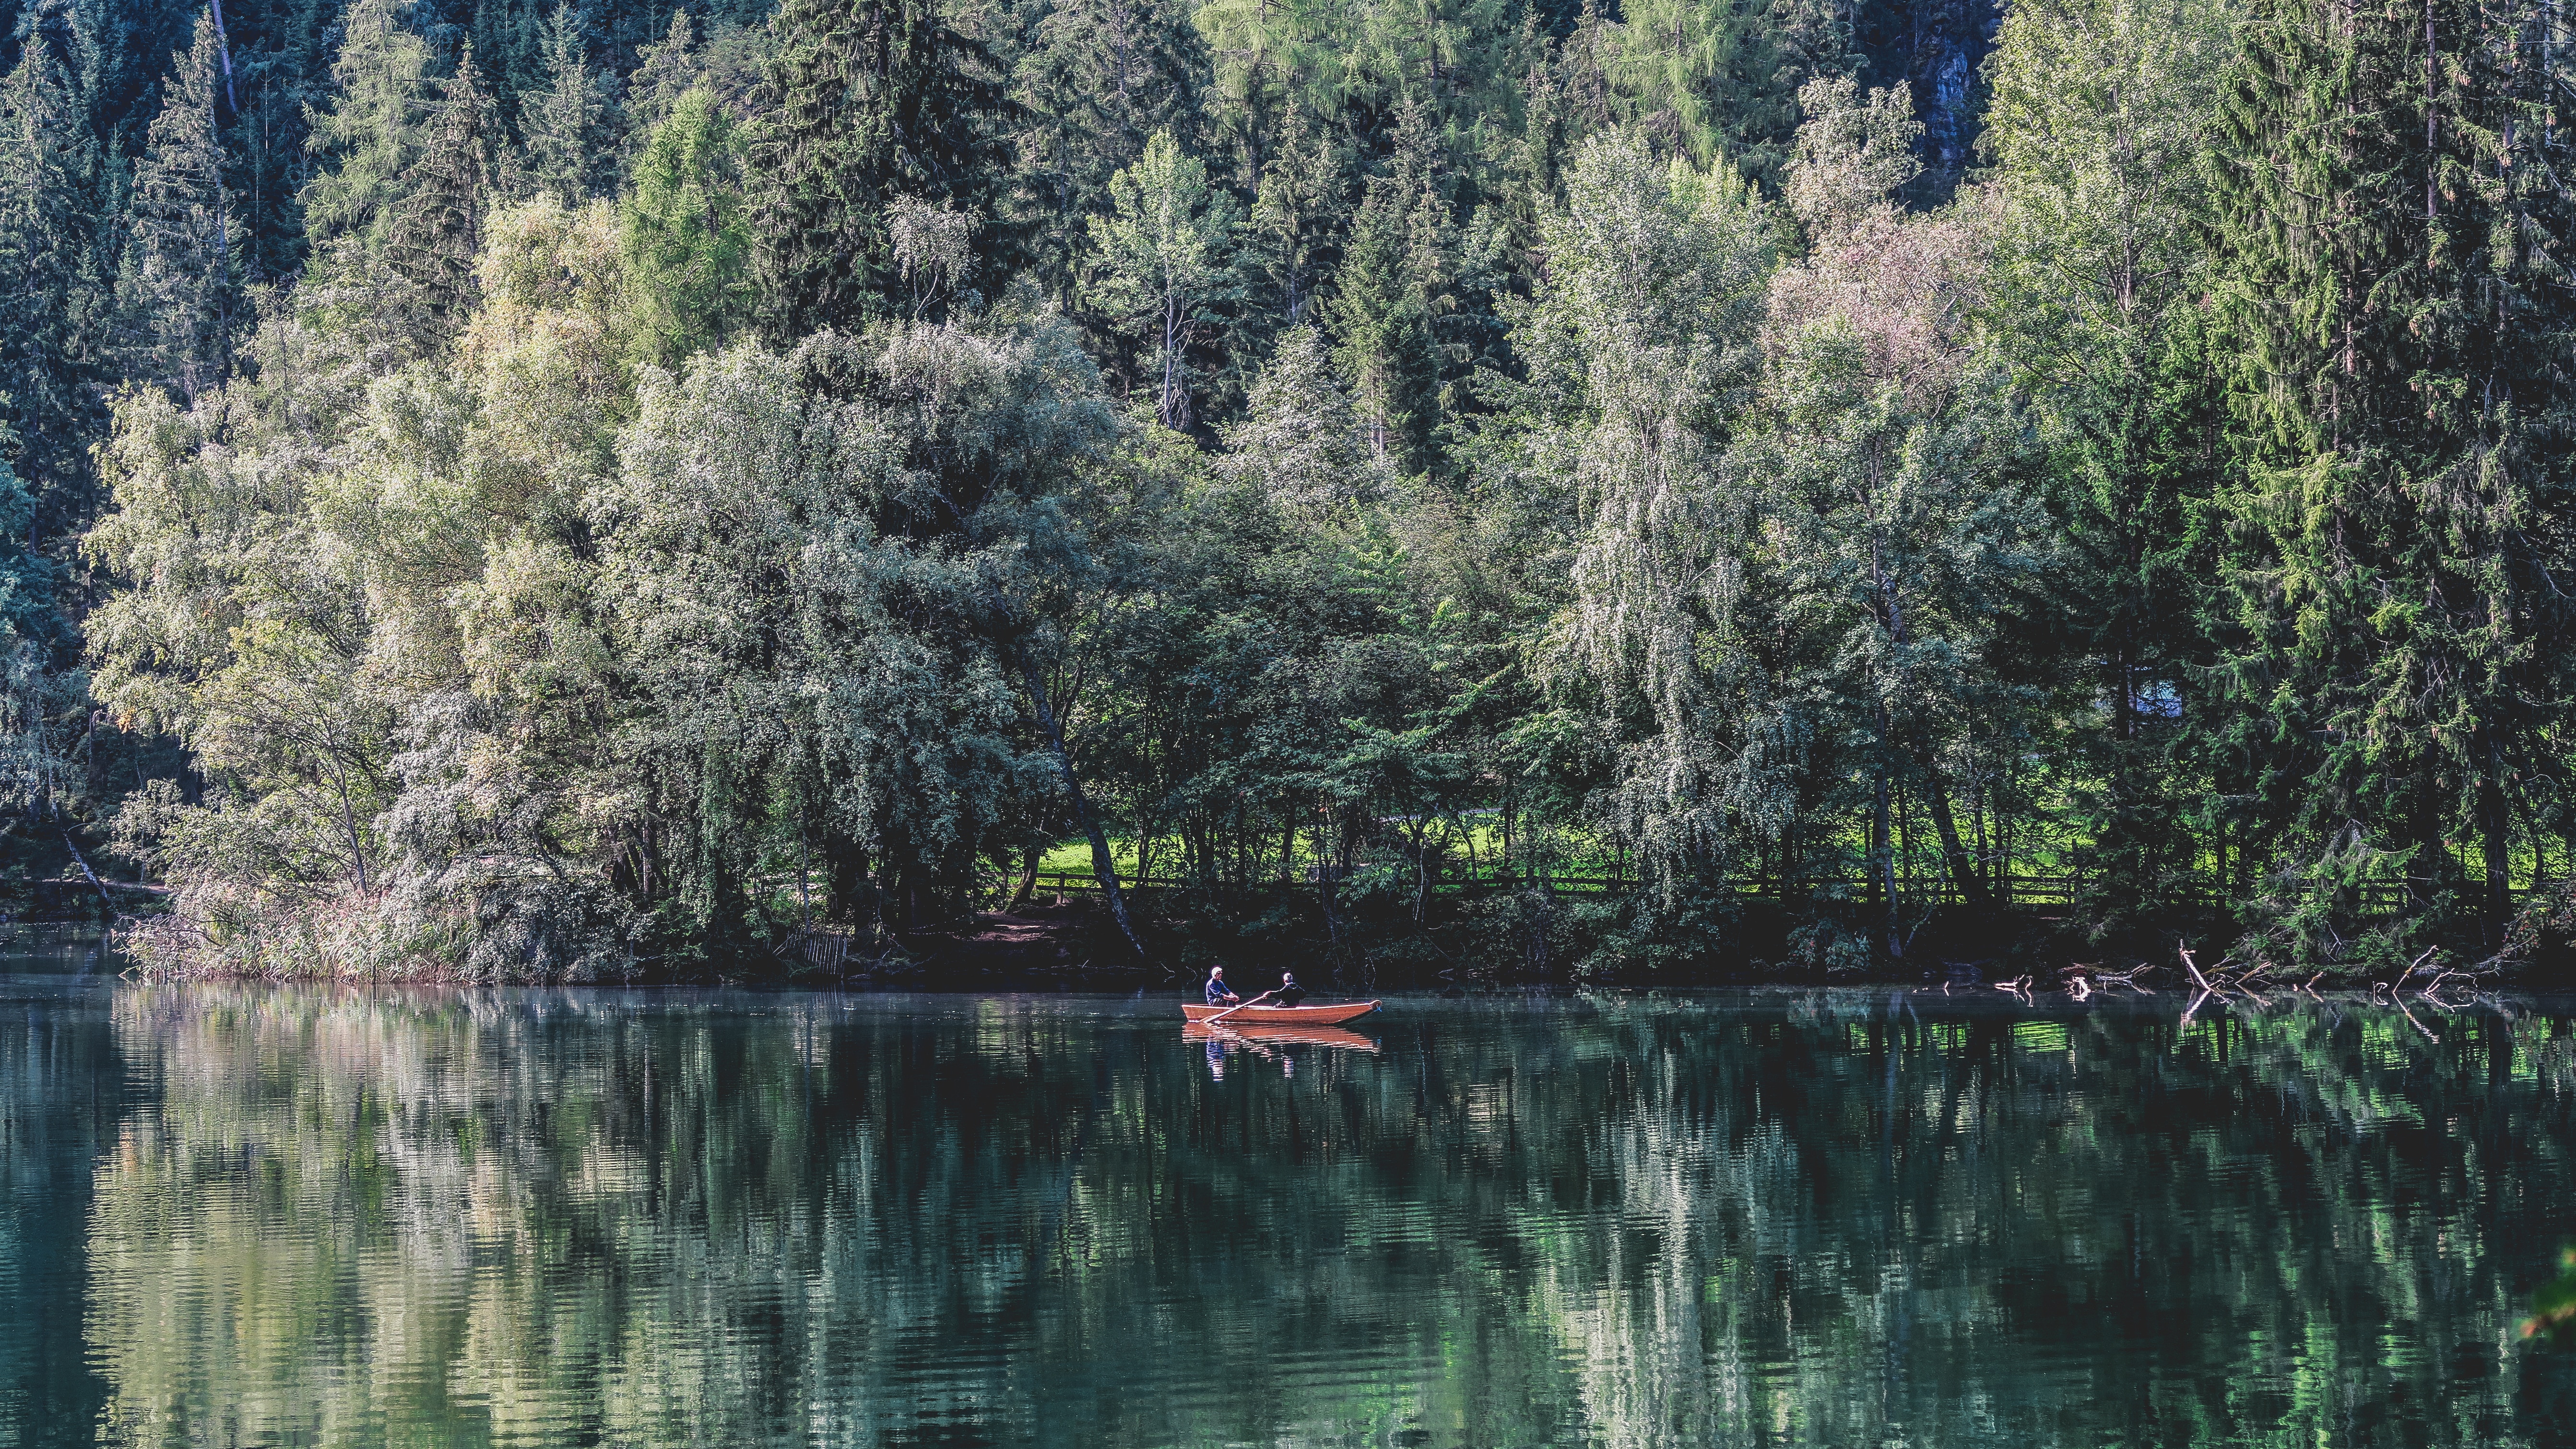 two person on boat on body of water surrounded by trees during daytime